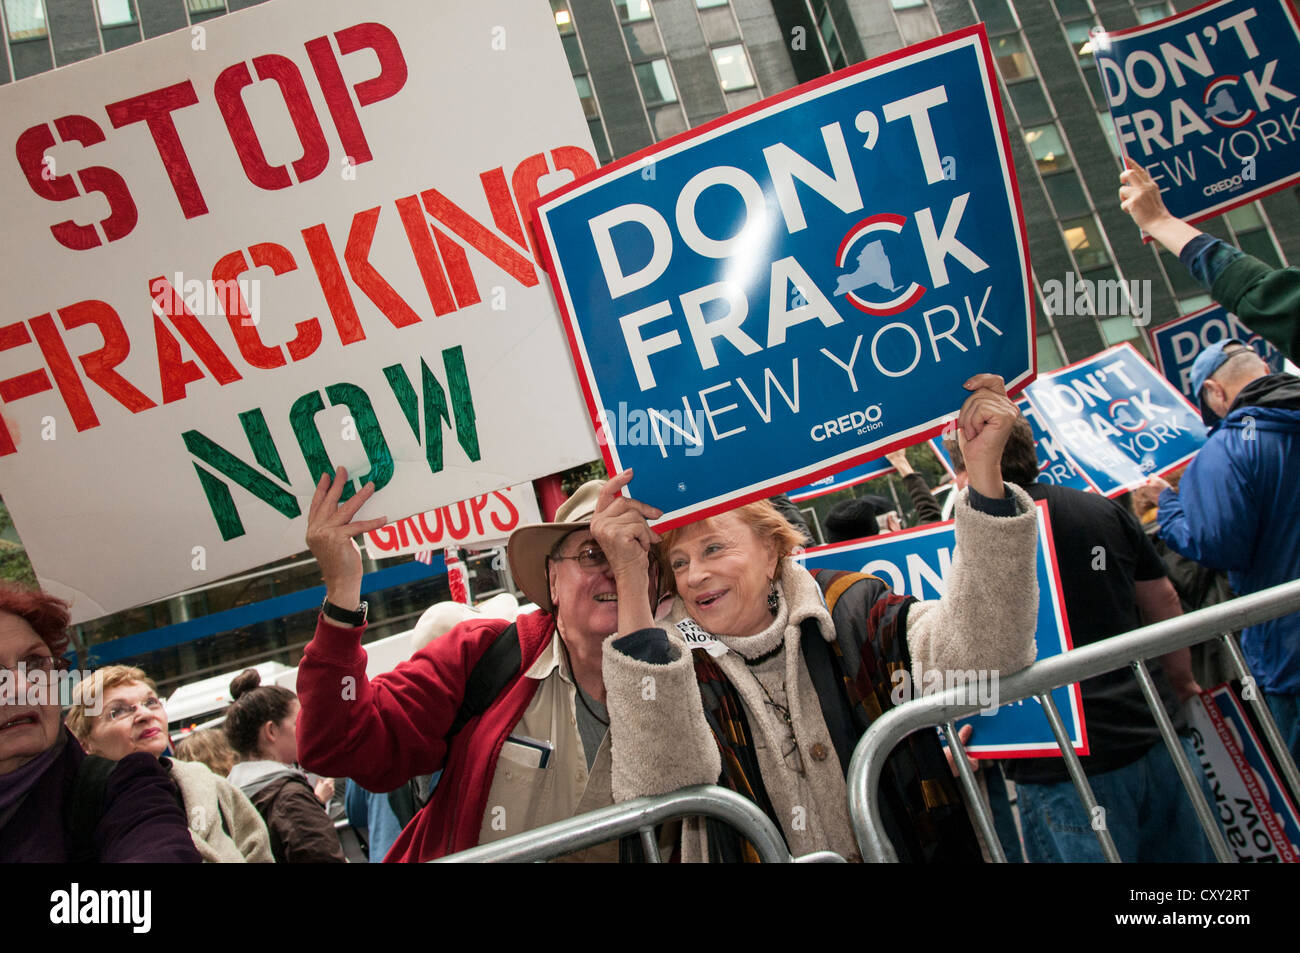 Activists demonstrate in a Manhattan protest against fracking for natural gas in New York outside NY Governor Cuomo's office. Stock Photo